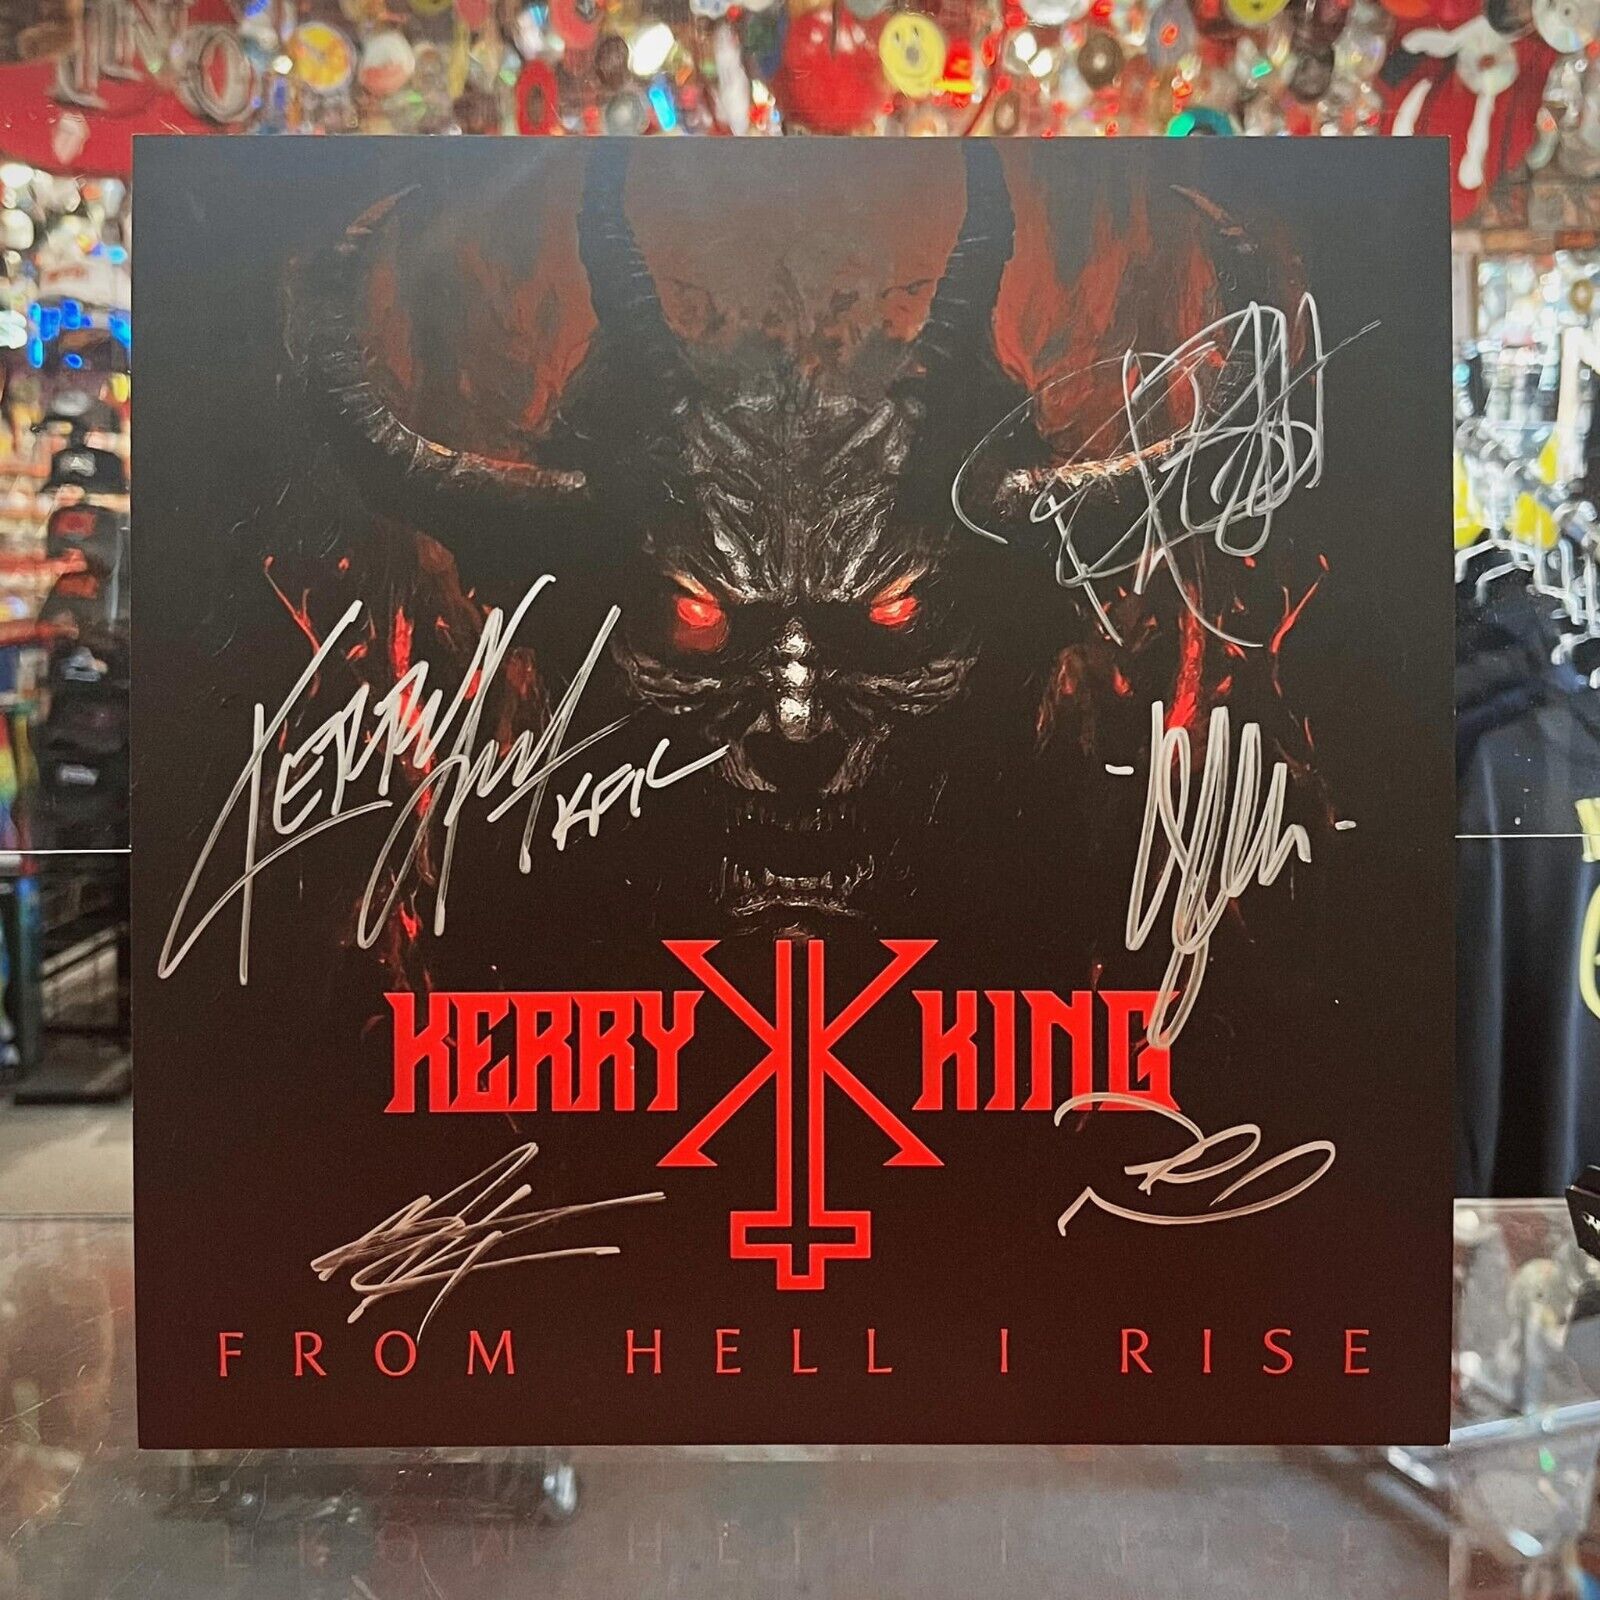 Kerry King From Hell I Rise SIGNED Lithograph + CD Brand NEW AUTOGRAPHED Slayer